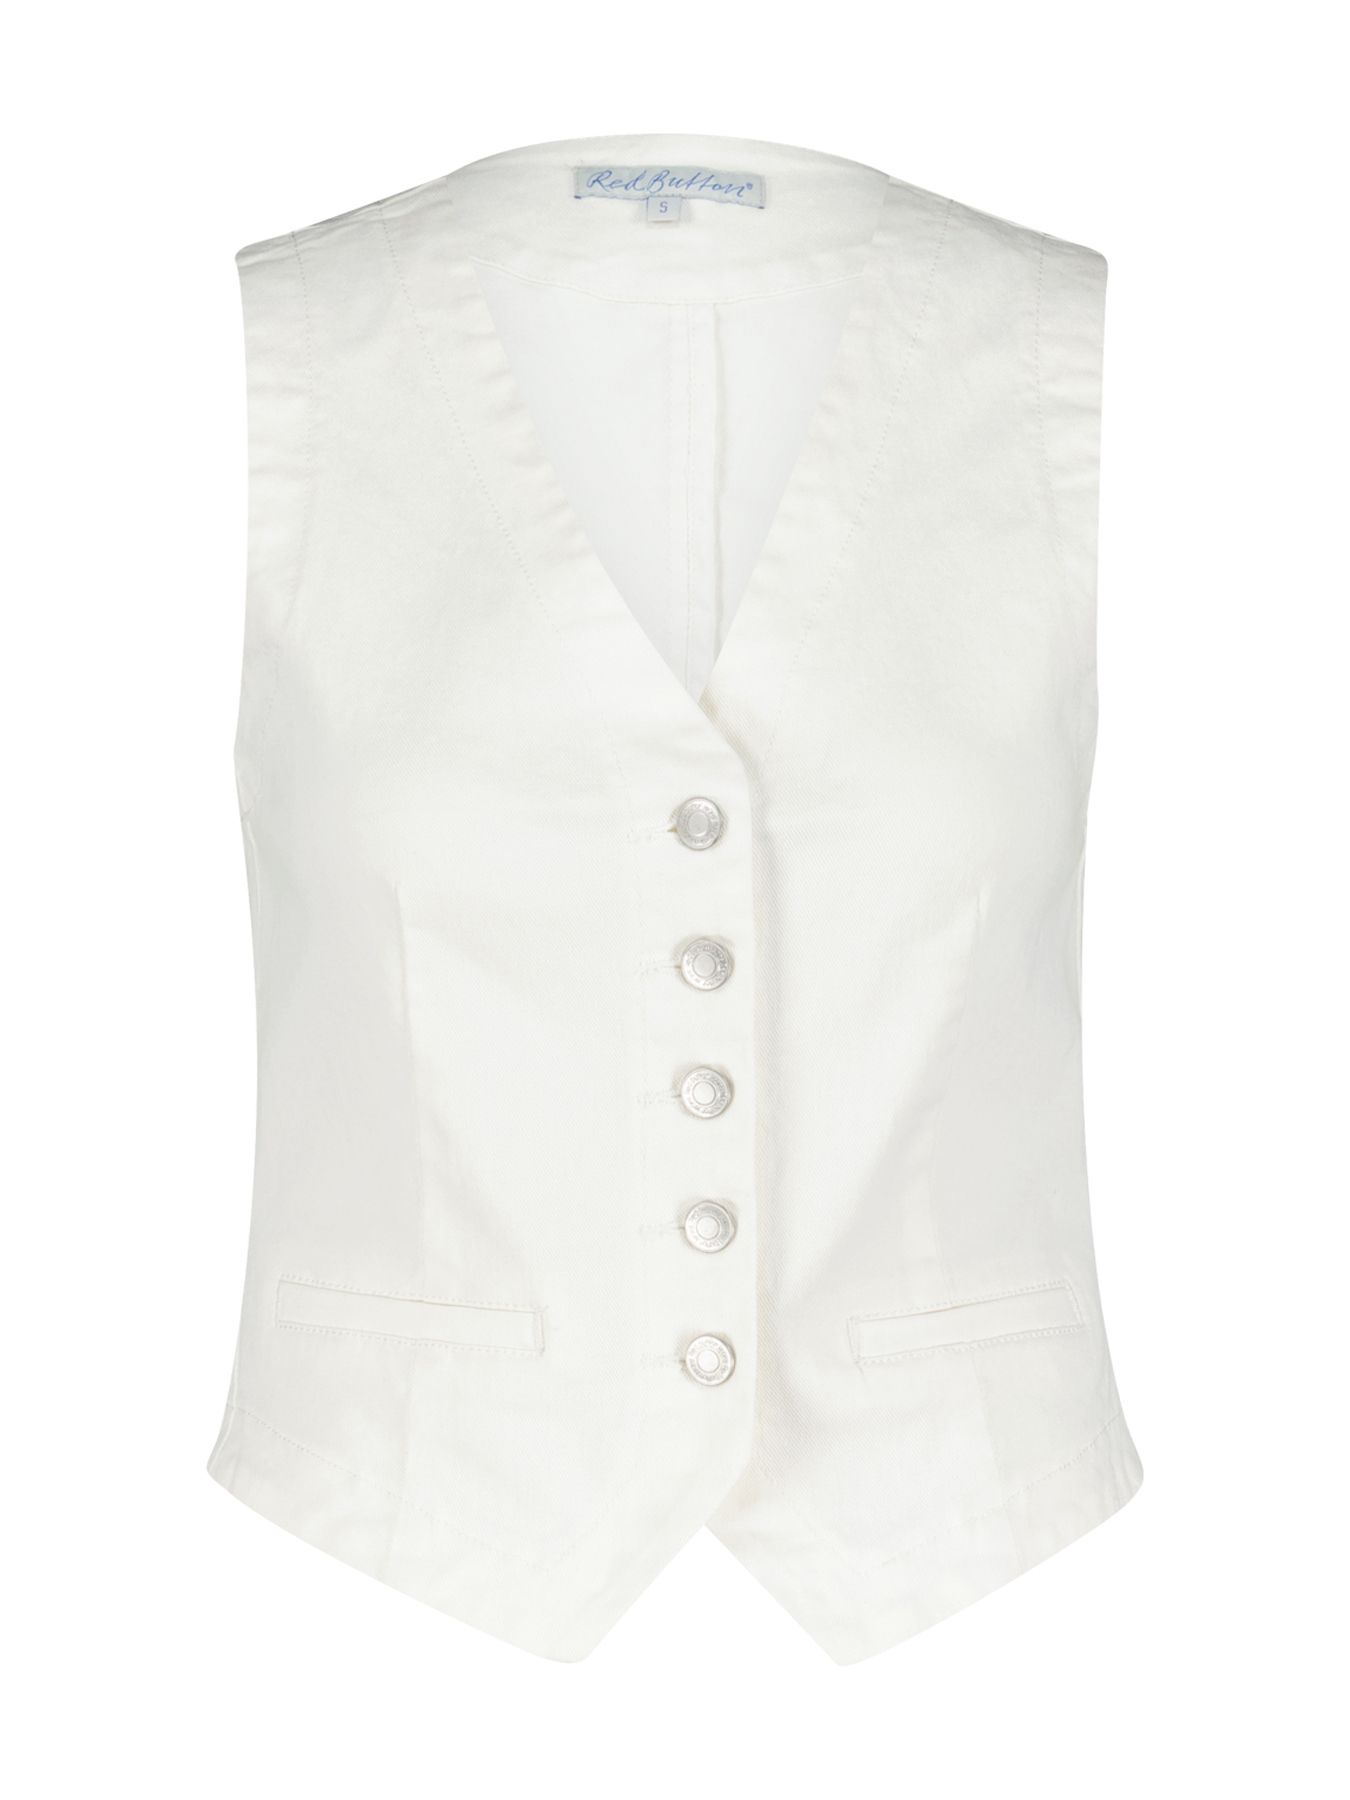 Red Button Waistcoat offwhite offwhite38 2900141054048